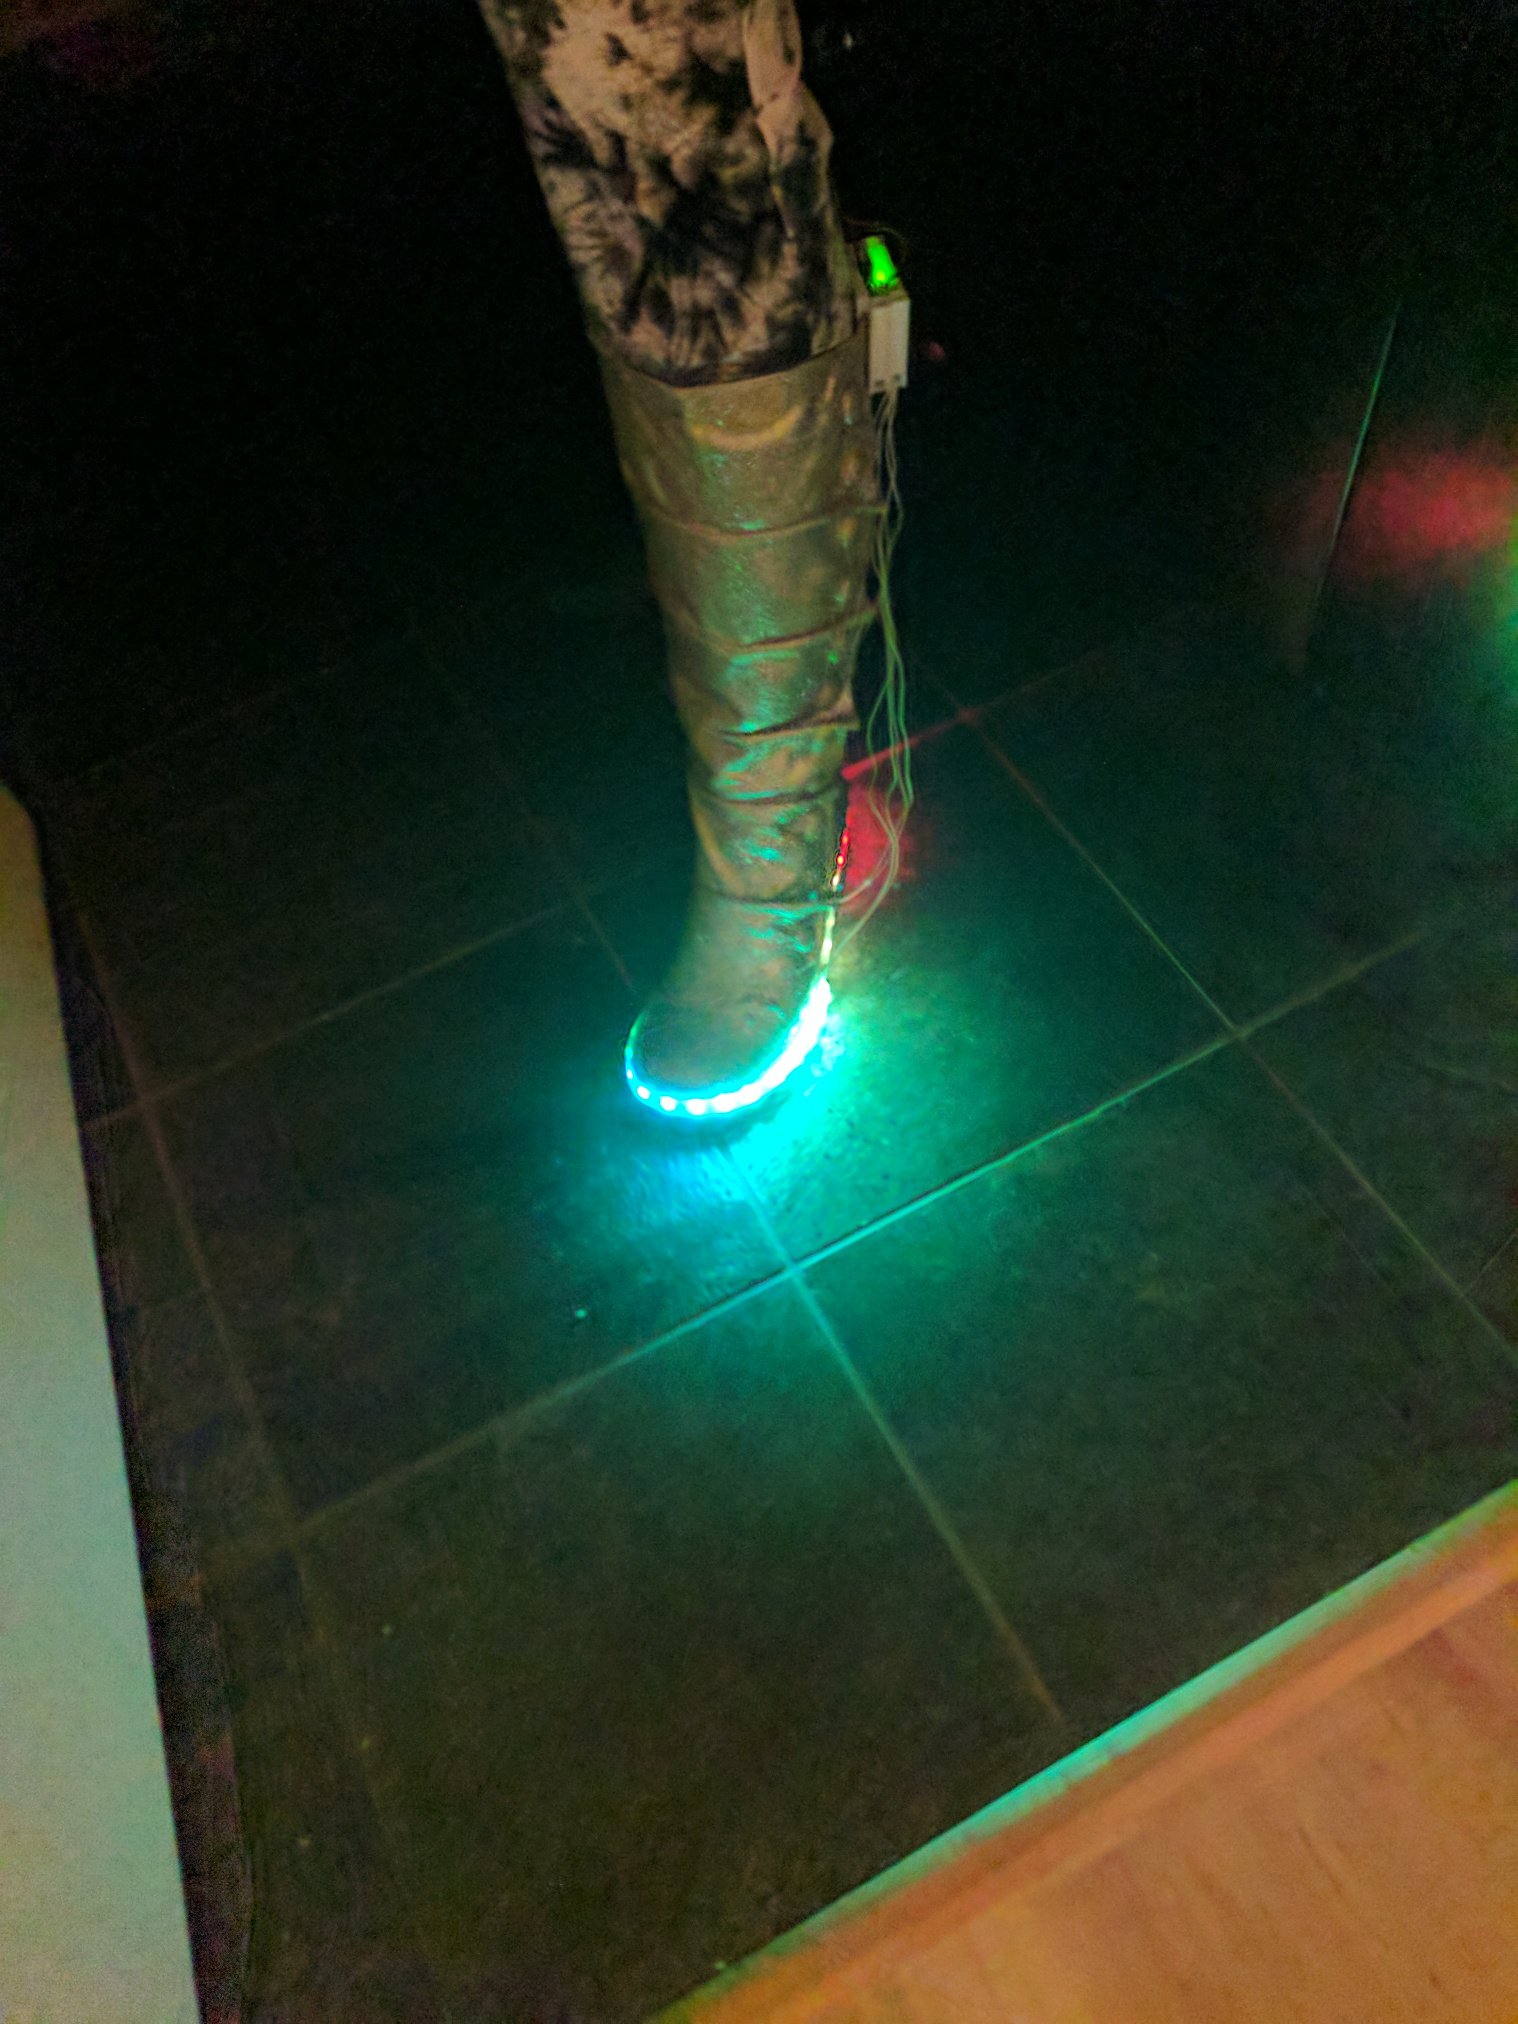 A leg, wearing a gold glitter covered calf high boot with LEDs along the base and a home made electronics enclosure on the back.  Wires hang loose. The LEDs glow blue.